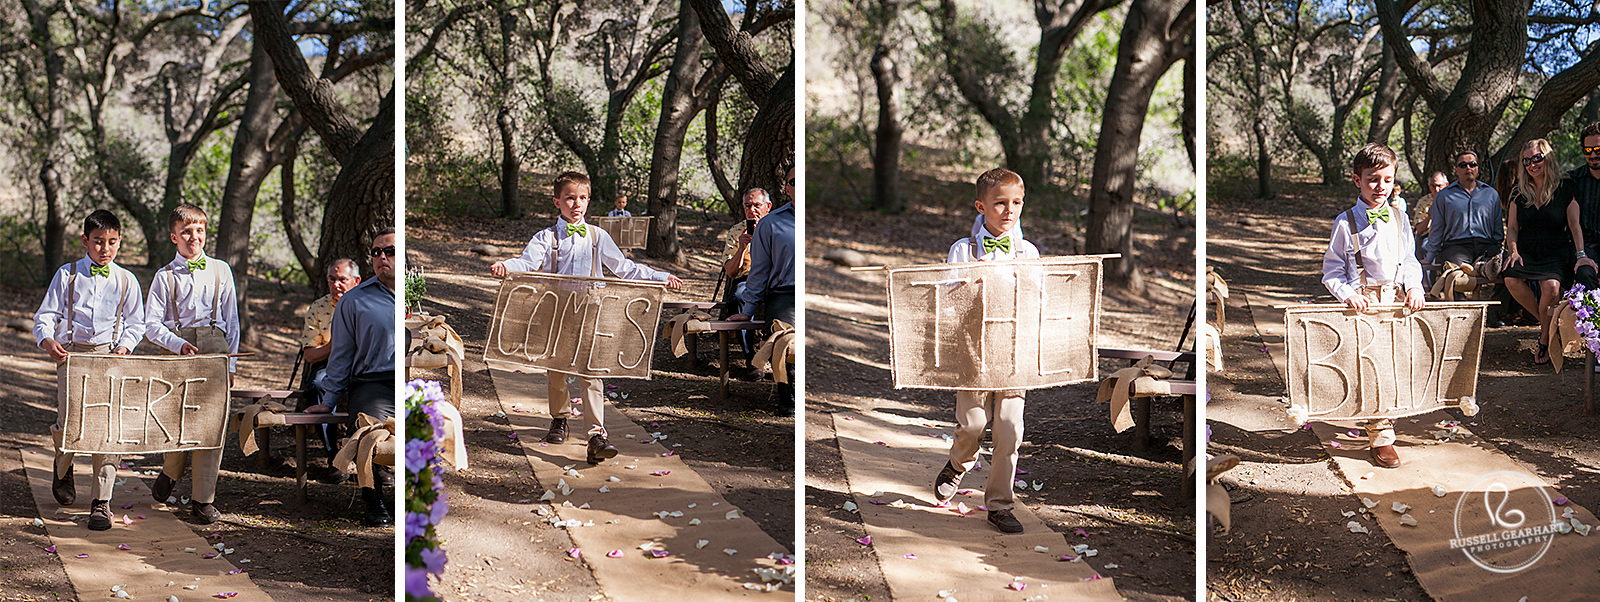 Here Comes The Bride Burlap Signs – Oak Canyon Nature Center Wedding: Orange County, CA – Russell Gearhart Photography – www.gearhartphoto.com  